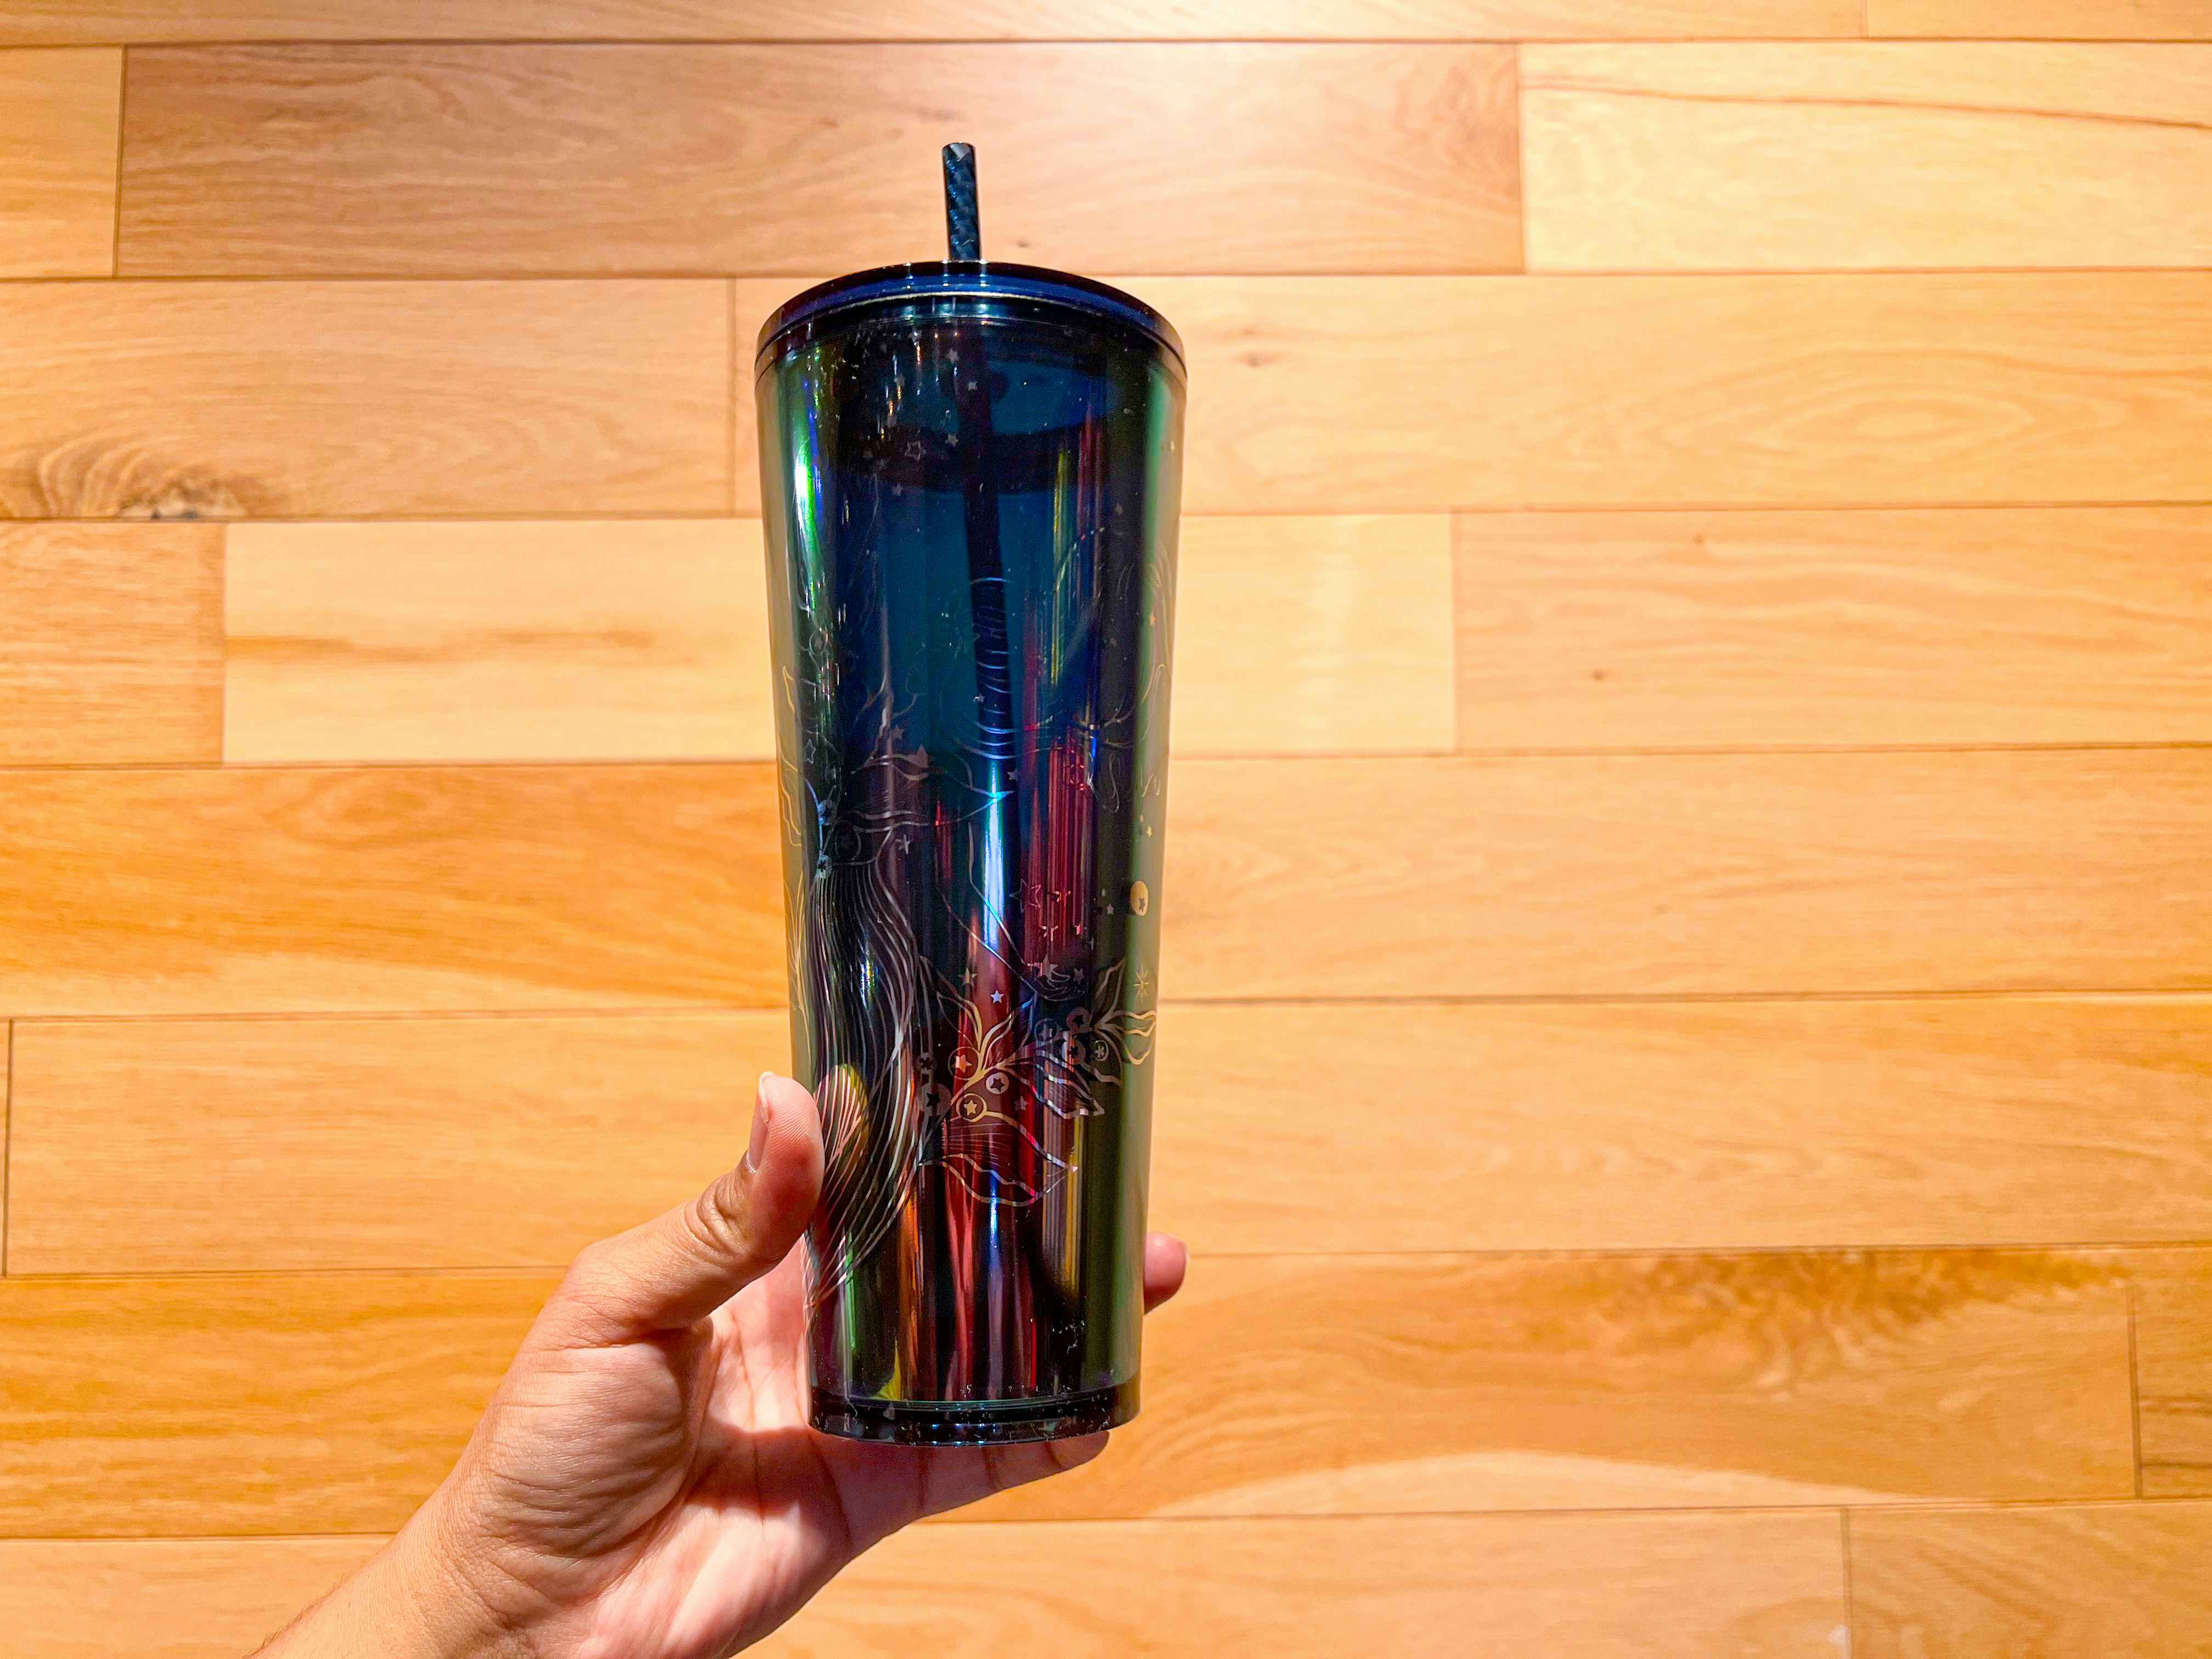 The 2024 Starbucks Winter Cups Are Here — See Pics and Prices - The Krazy  Coupon Lady